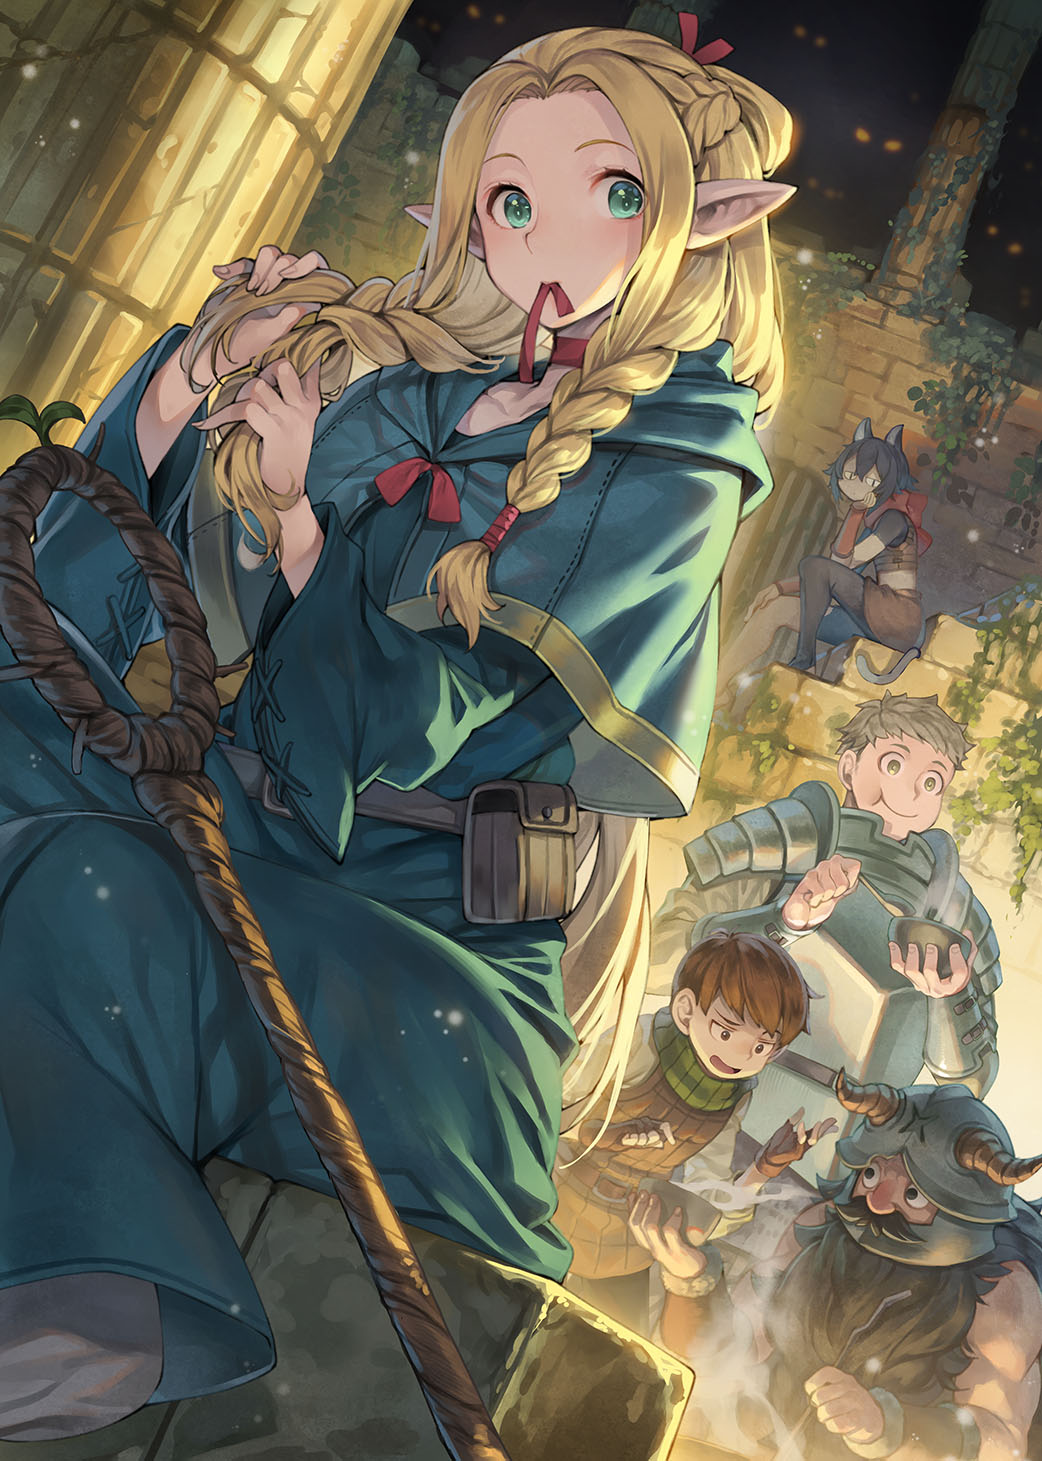 Delicious In Dungeon Night Portrait Display Long Hair Marcille Donato Blushing Chilchuck Tims Armor  1042x1461